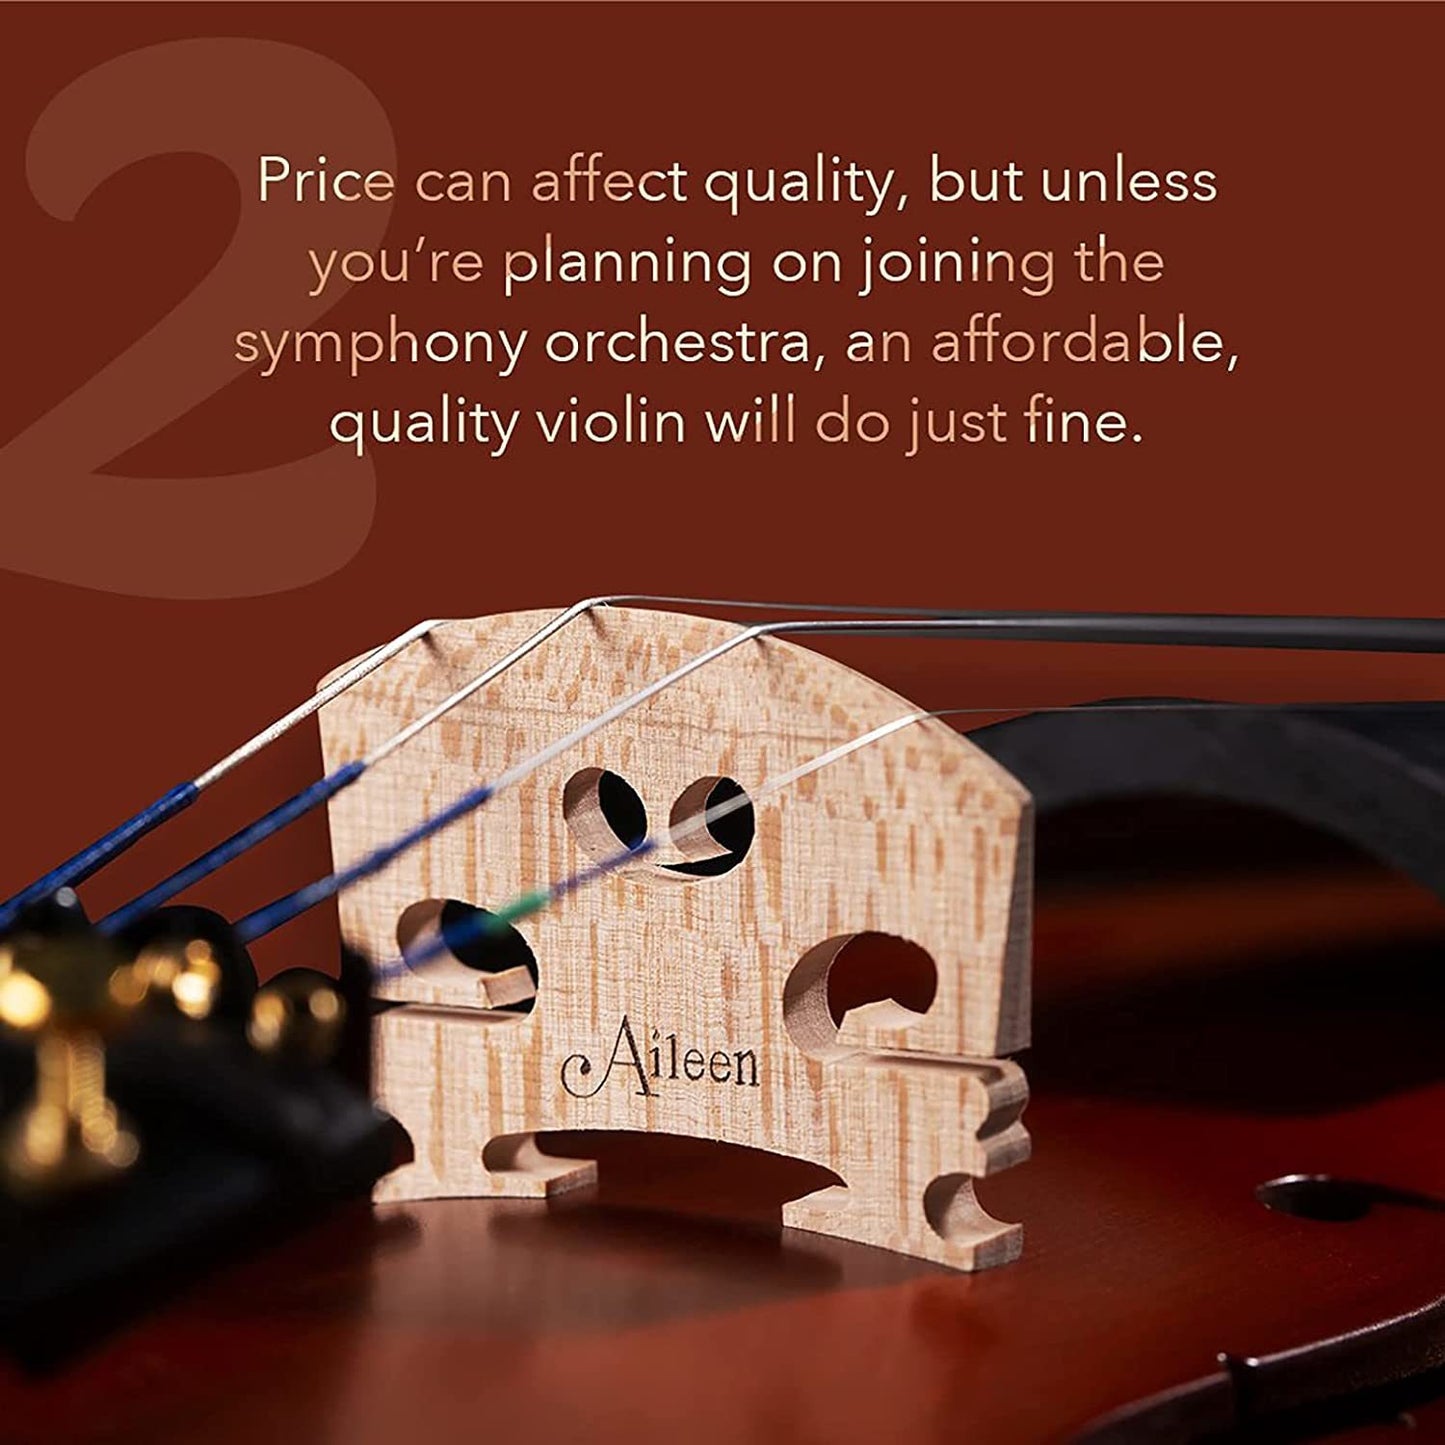 Aileen PREMIUM BEGINNER Series Violin Outfit - 4/4 Full Size Solid Wood Ebony Fitted for Kids Students;  Teachers Approved